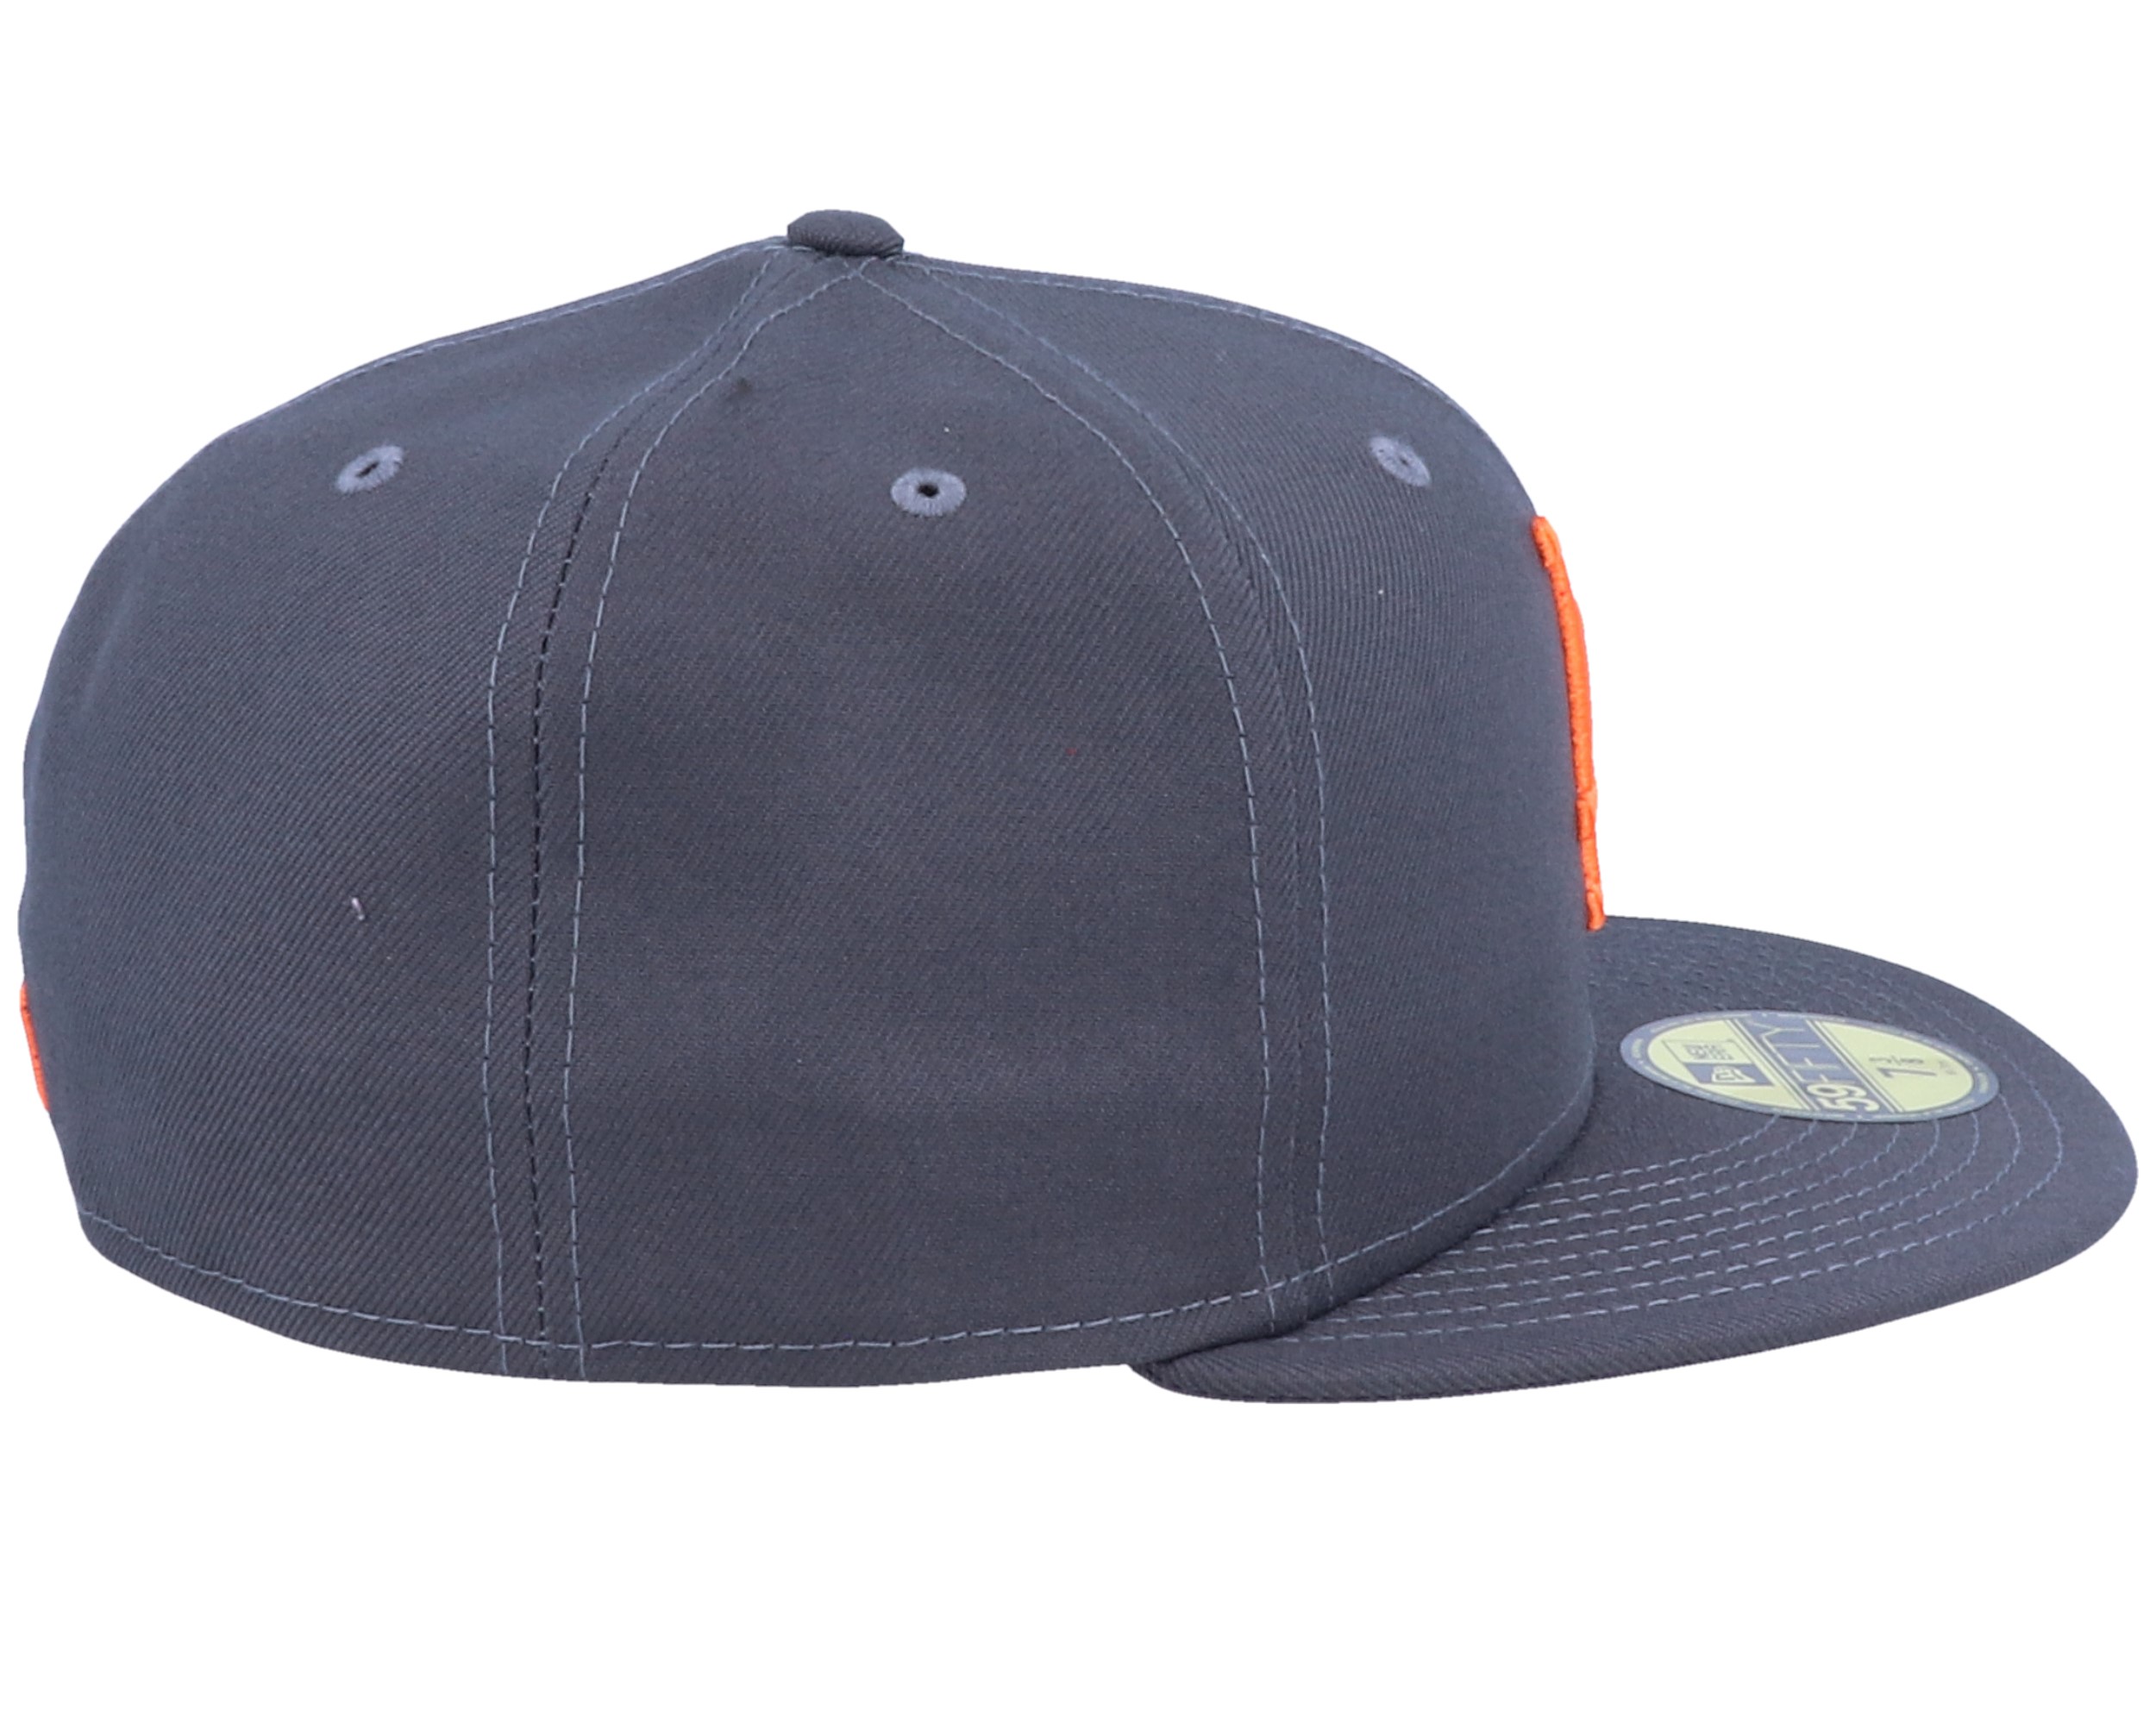 Los Angeles Dodgers League Essential 9Fifty Dark Grey/Orange Fitted ...